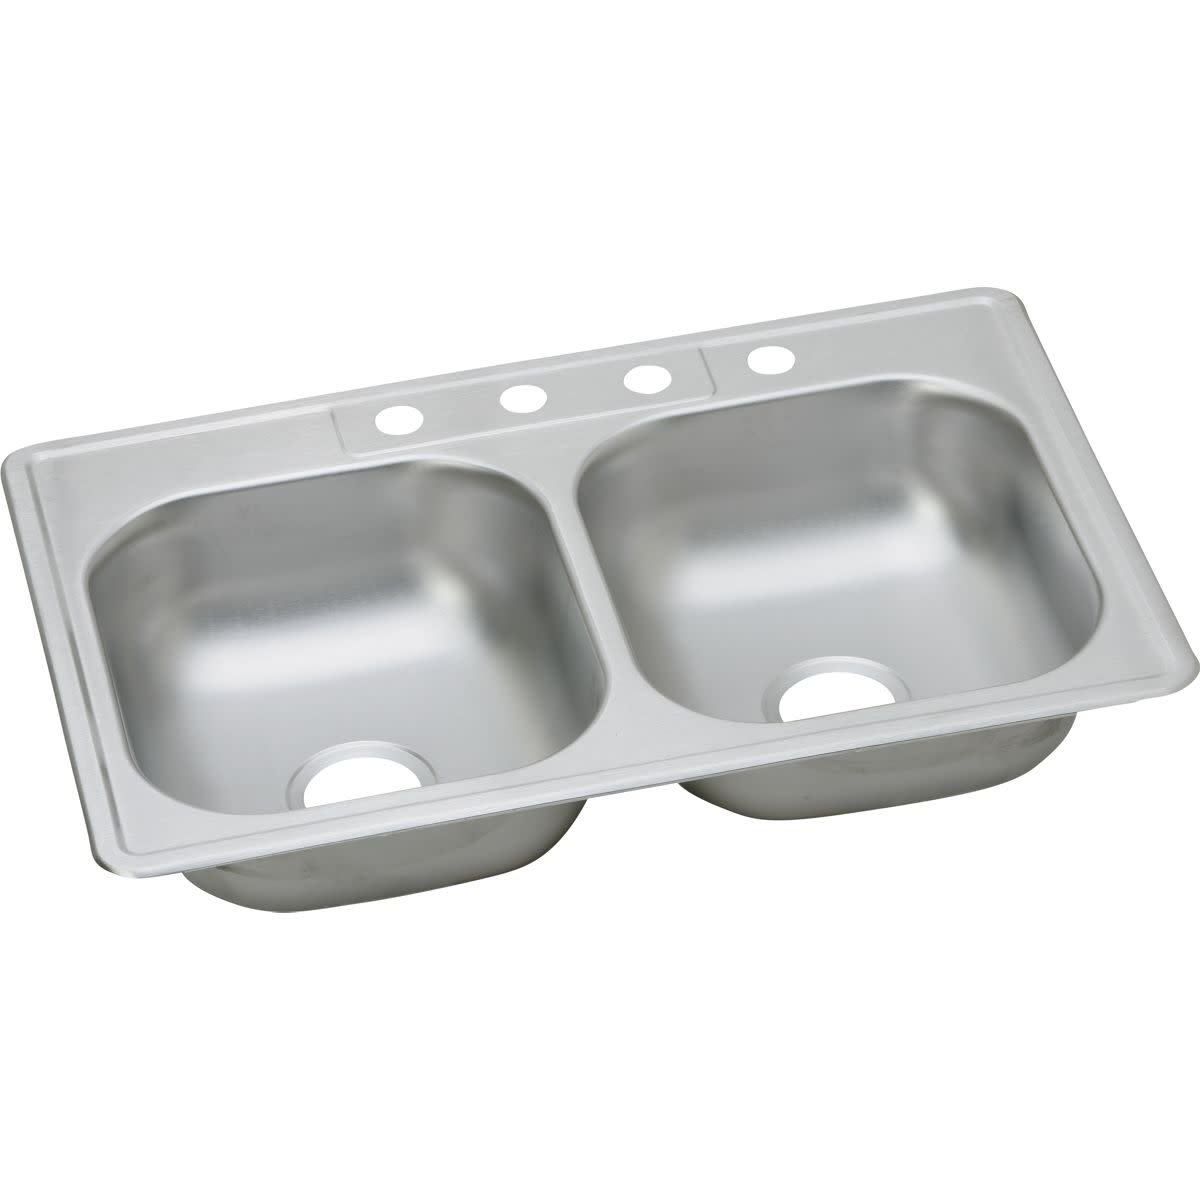 Elkay D233212 Dayton 33 x 21-1/4 x 6-9/16 Equal Double Bowl Drop-in Kitchen Sink, 2 Holes, 22-Gauge Stainless - image 1 of 7